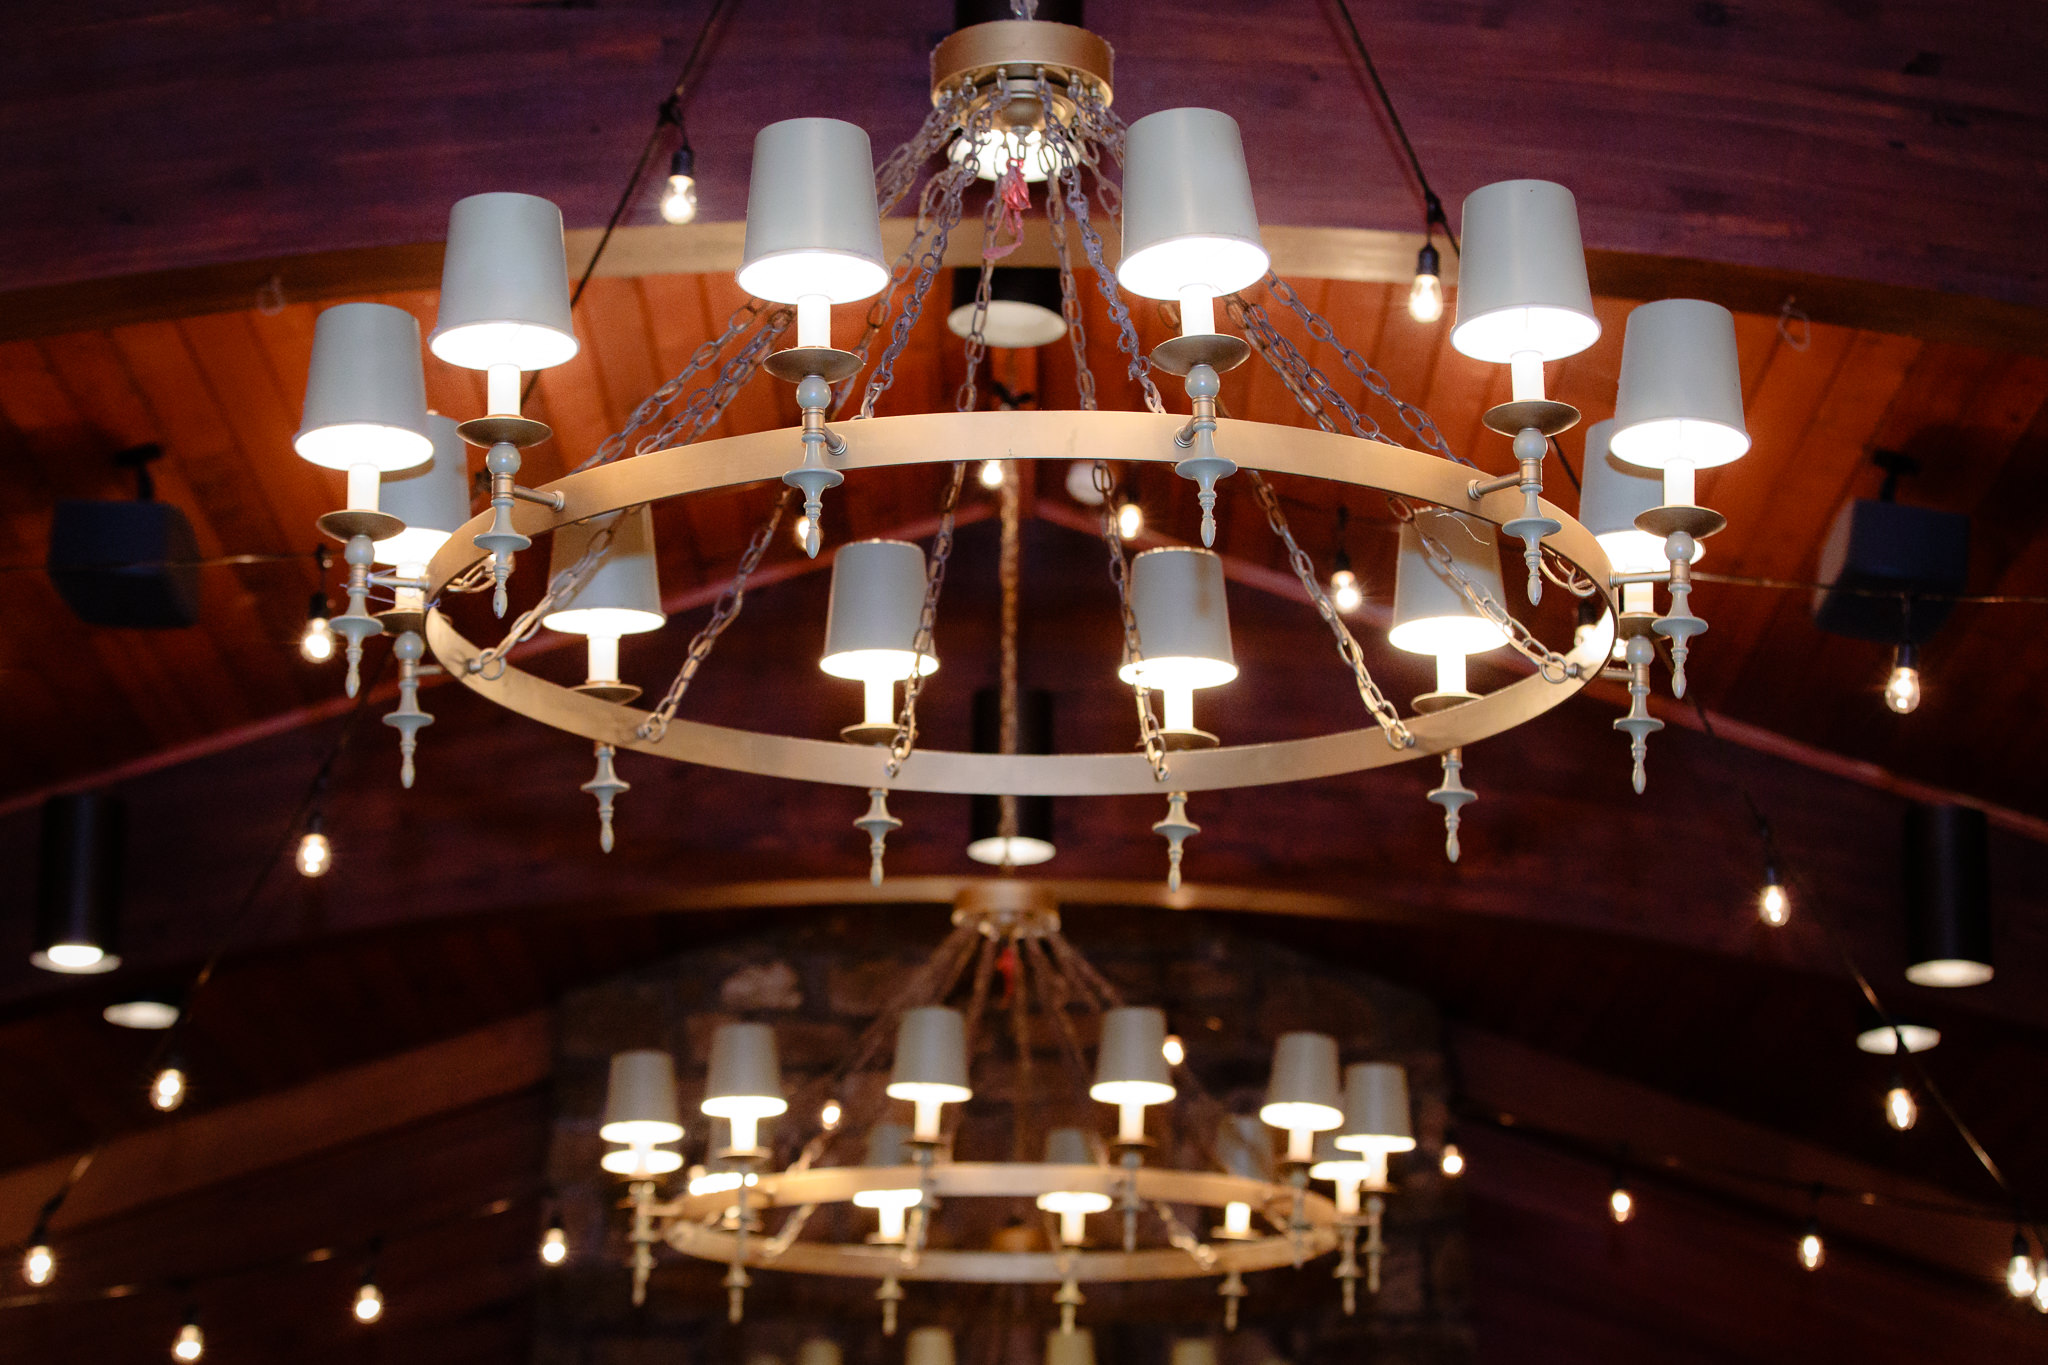 Chandeliers hang from the ceiling in the indoor wedding ceremony space at Oglebay